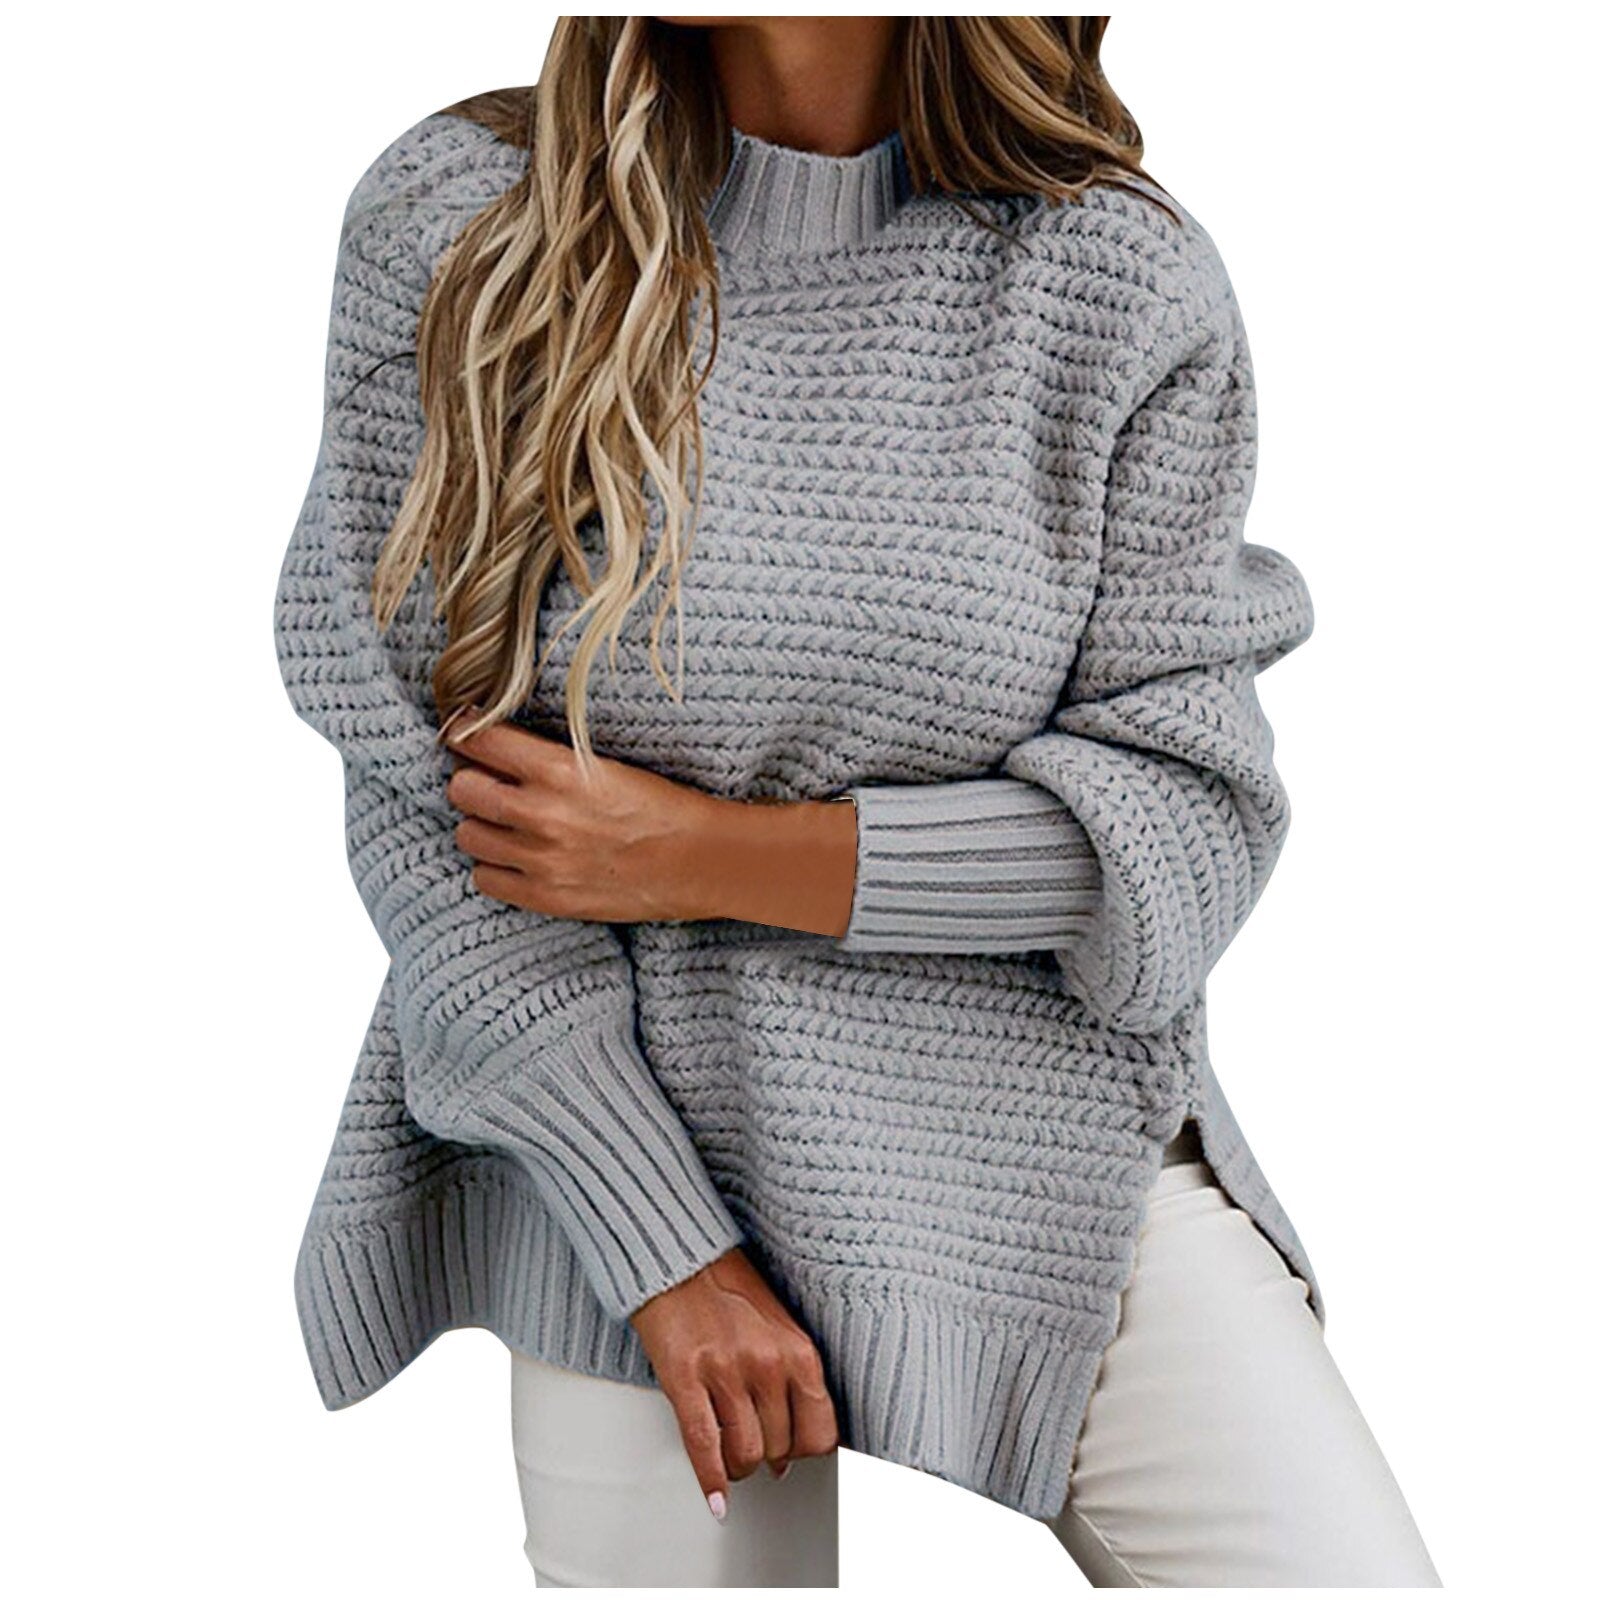 Prettyswomen Women's Sweater Fashion Half High Neck Loose Solid Color Long Sleeve Thick Sweater Pullover Streetwear Autumn Winter Tops Mujer